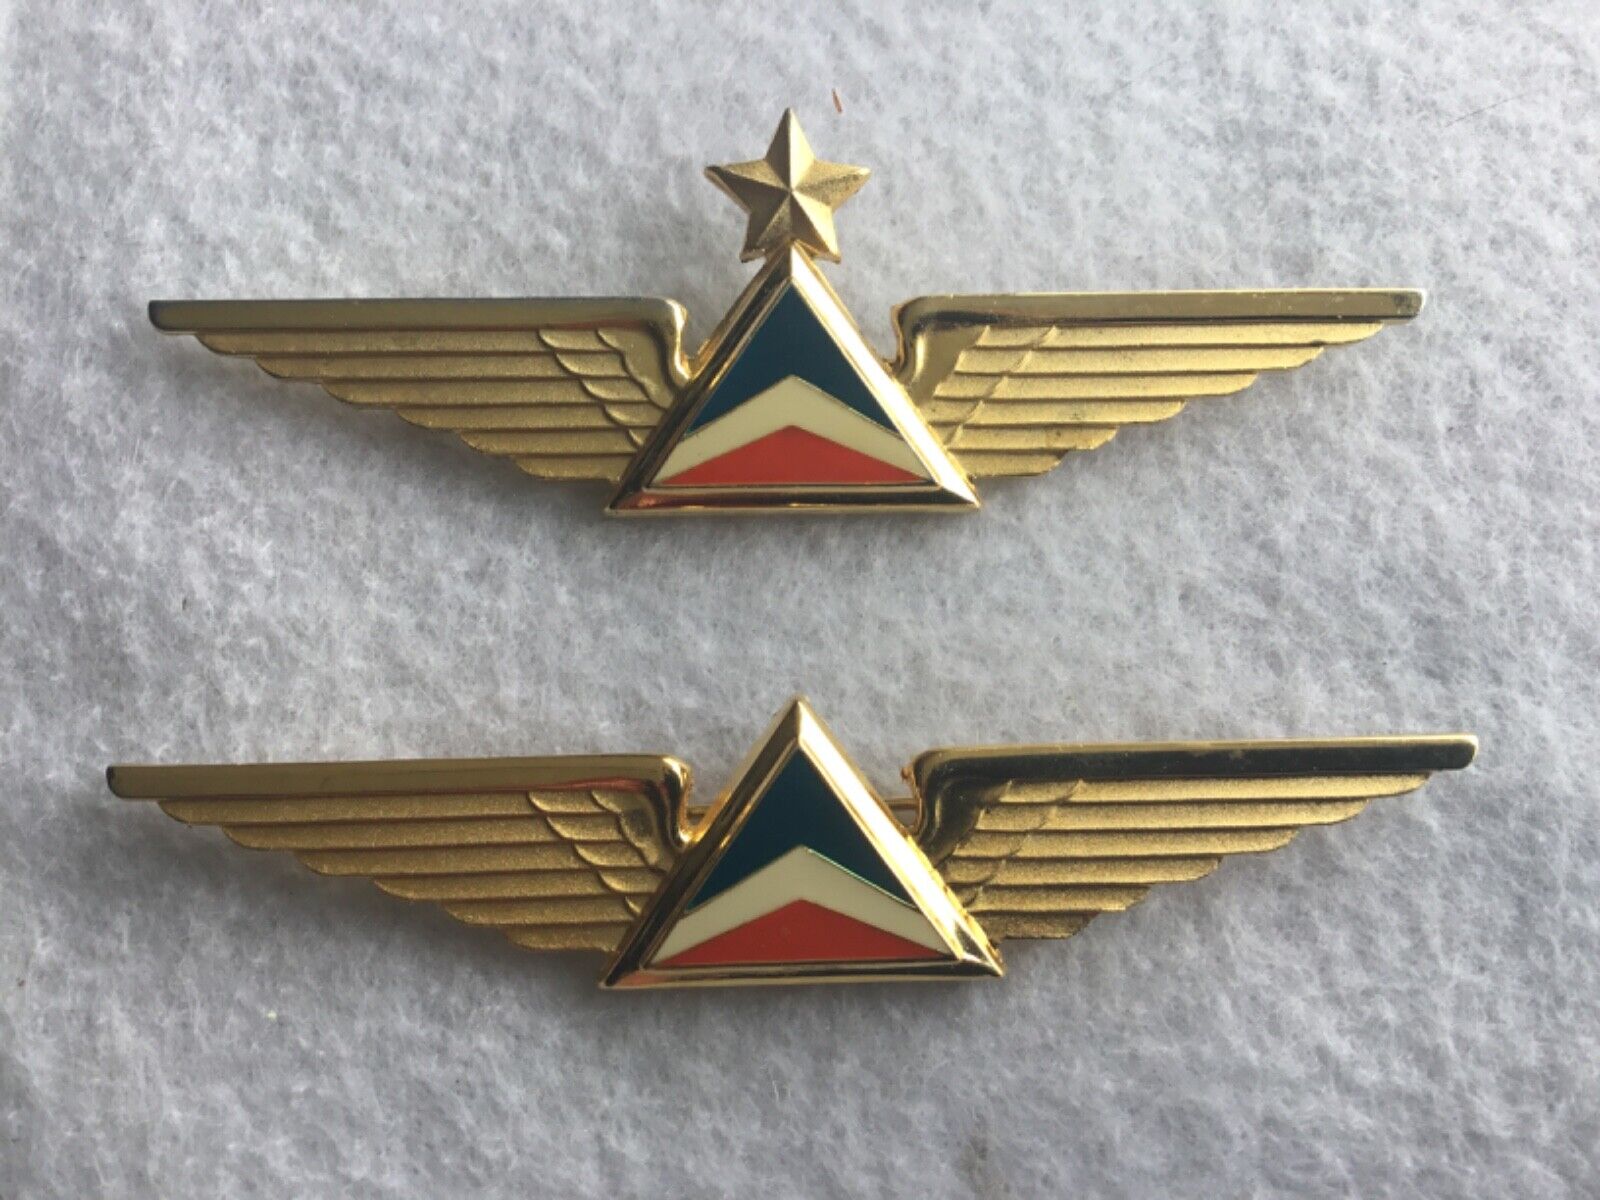 Lot of 2 Vintage Delta Airlines Pilot Wings Gold Tone Badge Pin Badge Captain?